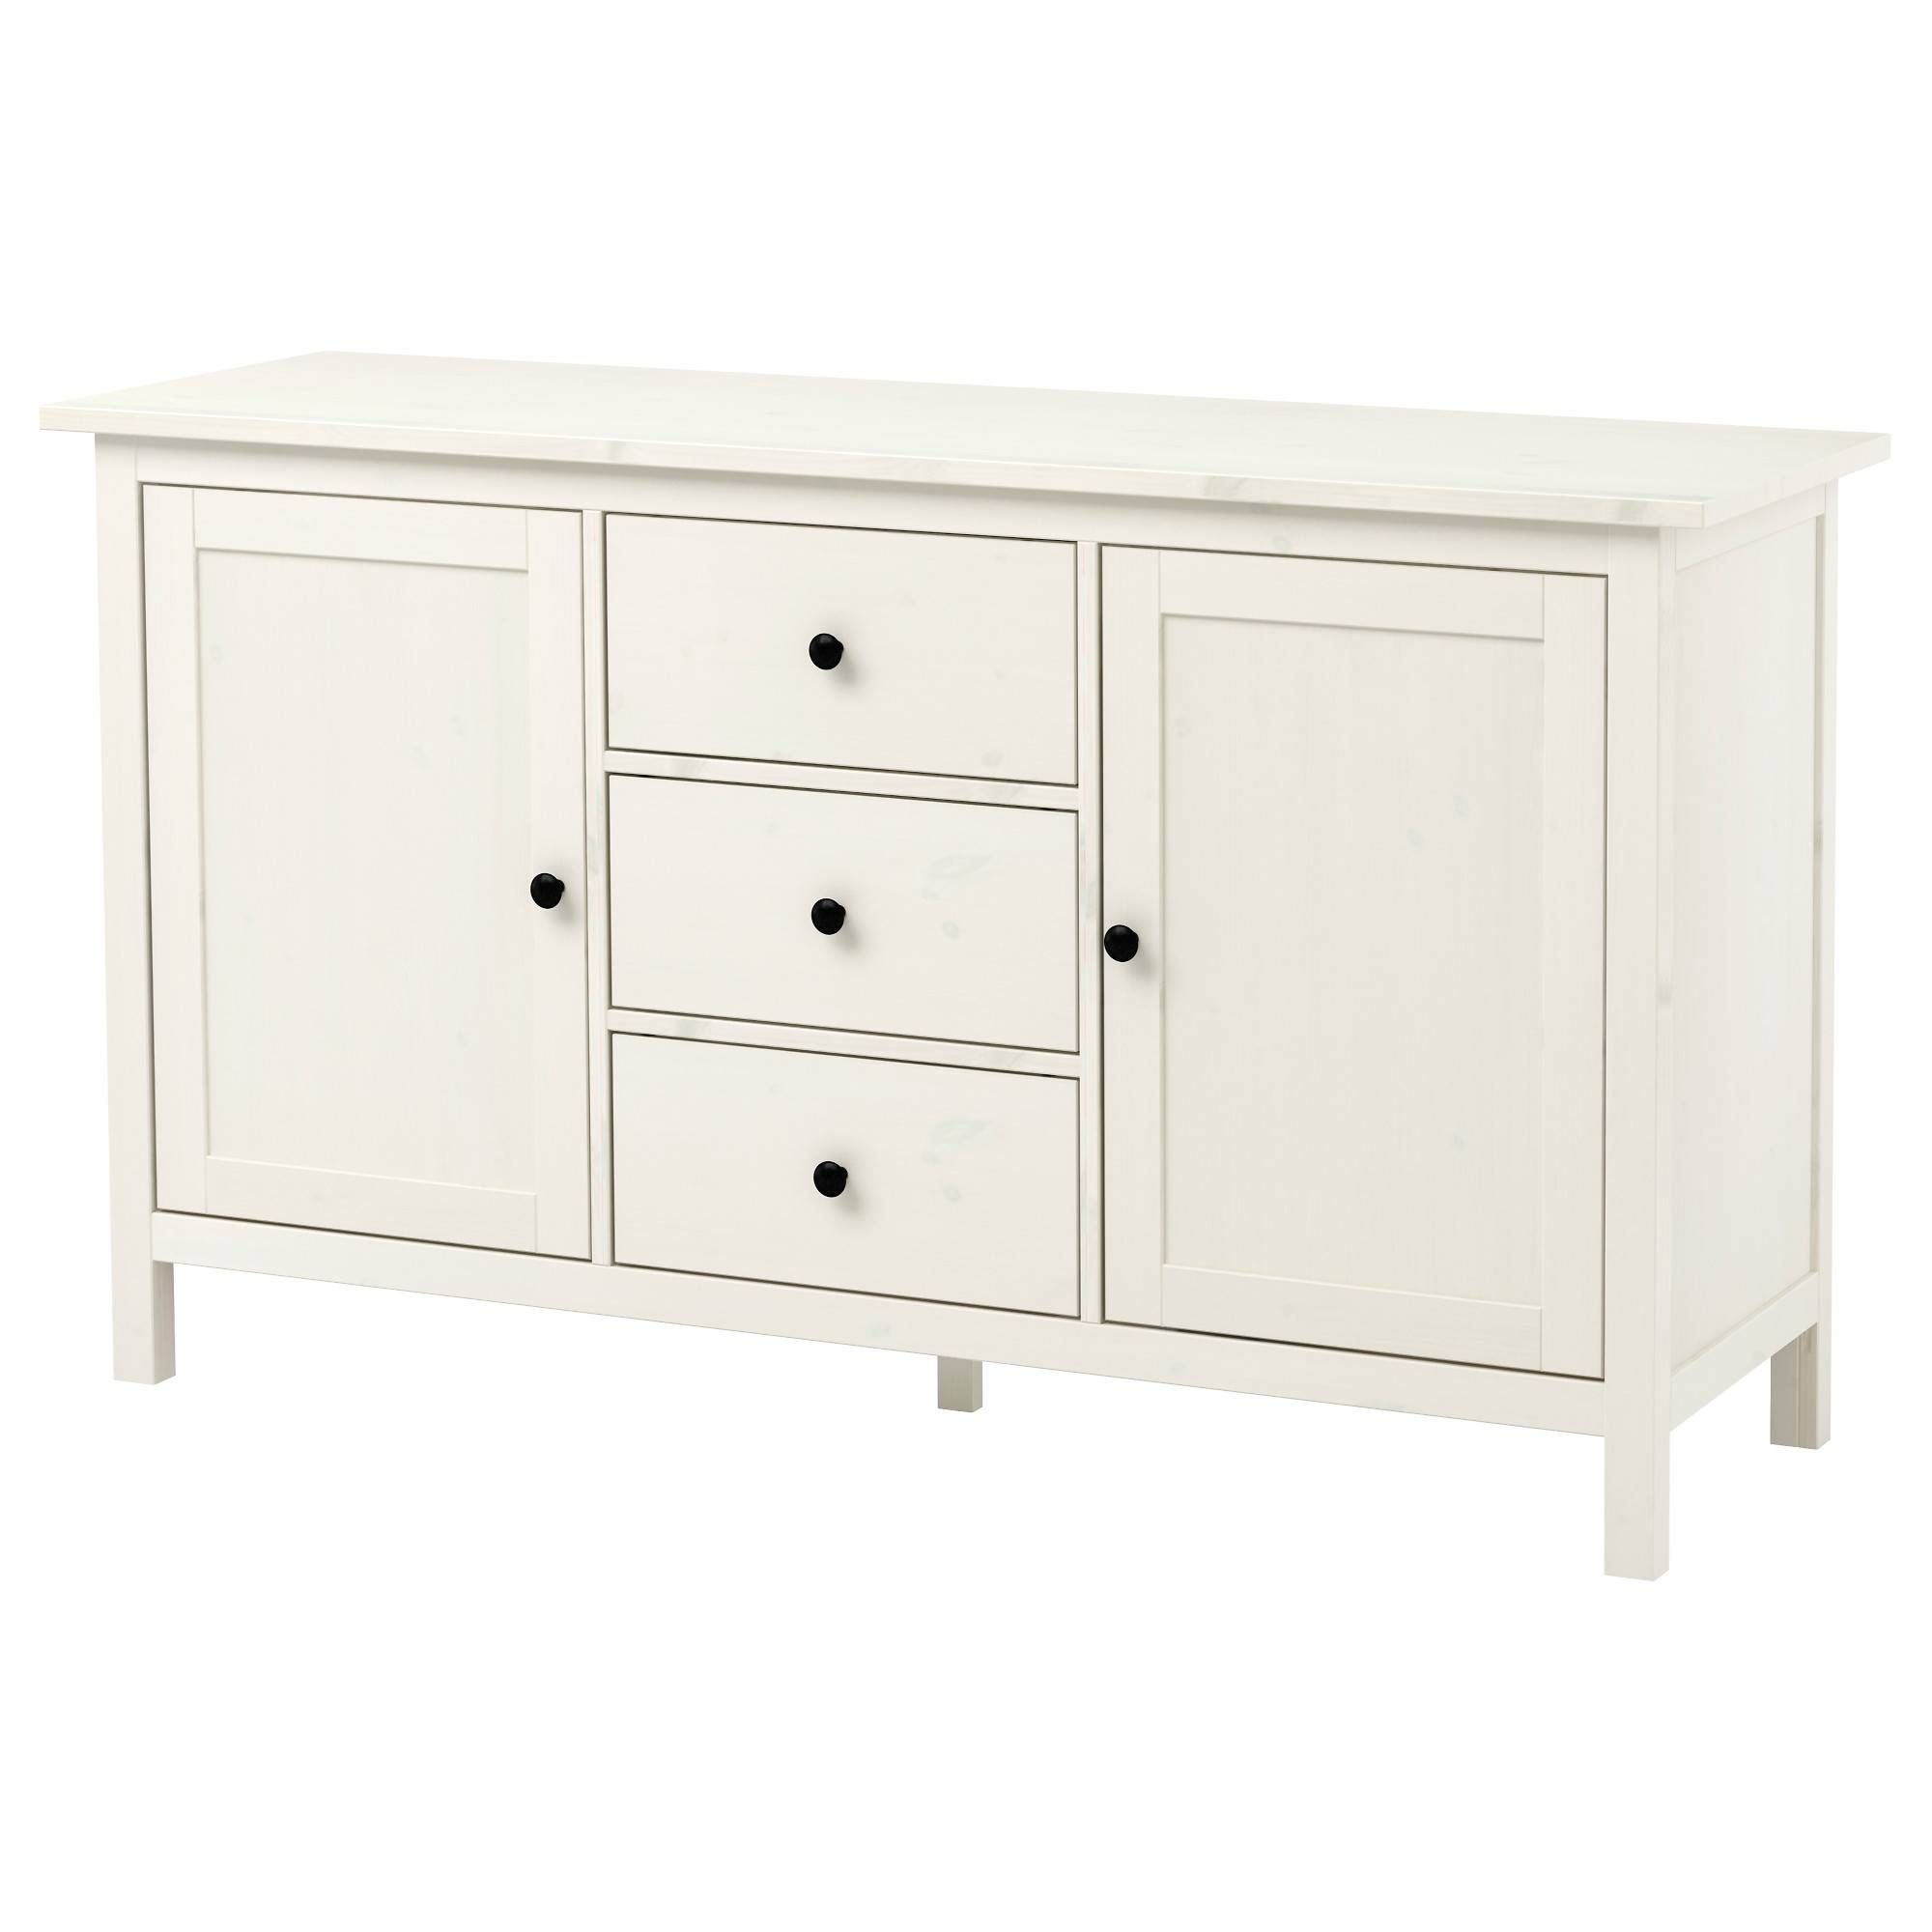 Hemnes Sideboard – White Stain – Ikea For Long Thin Sideboards (View 14 of 15)